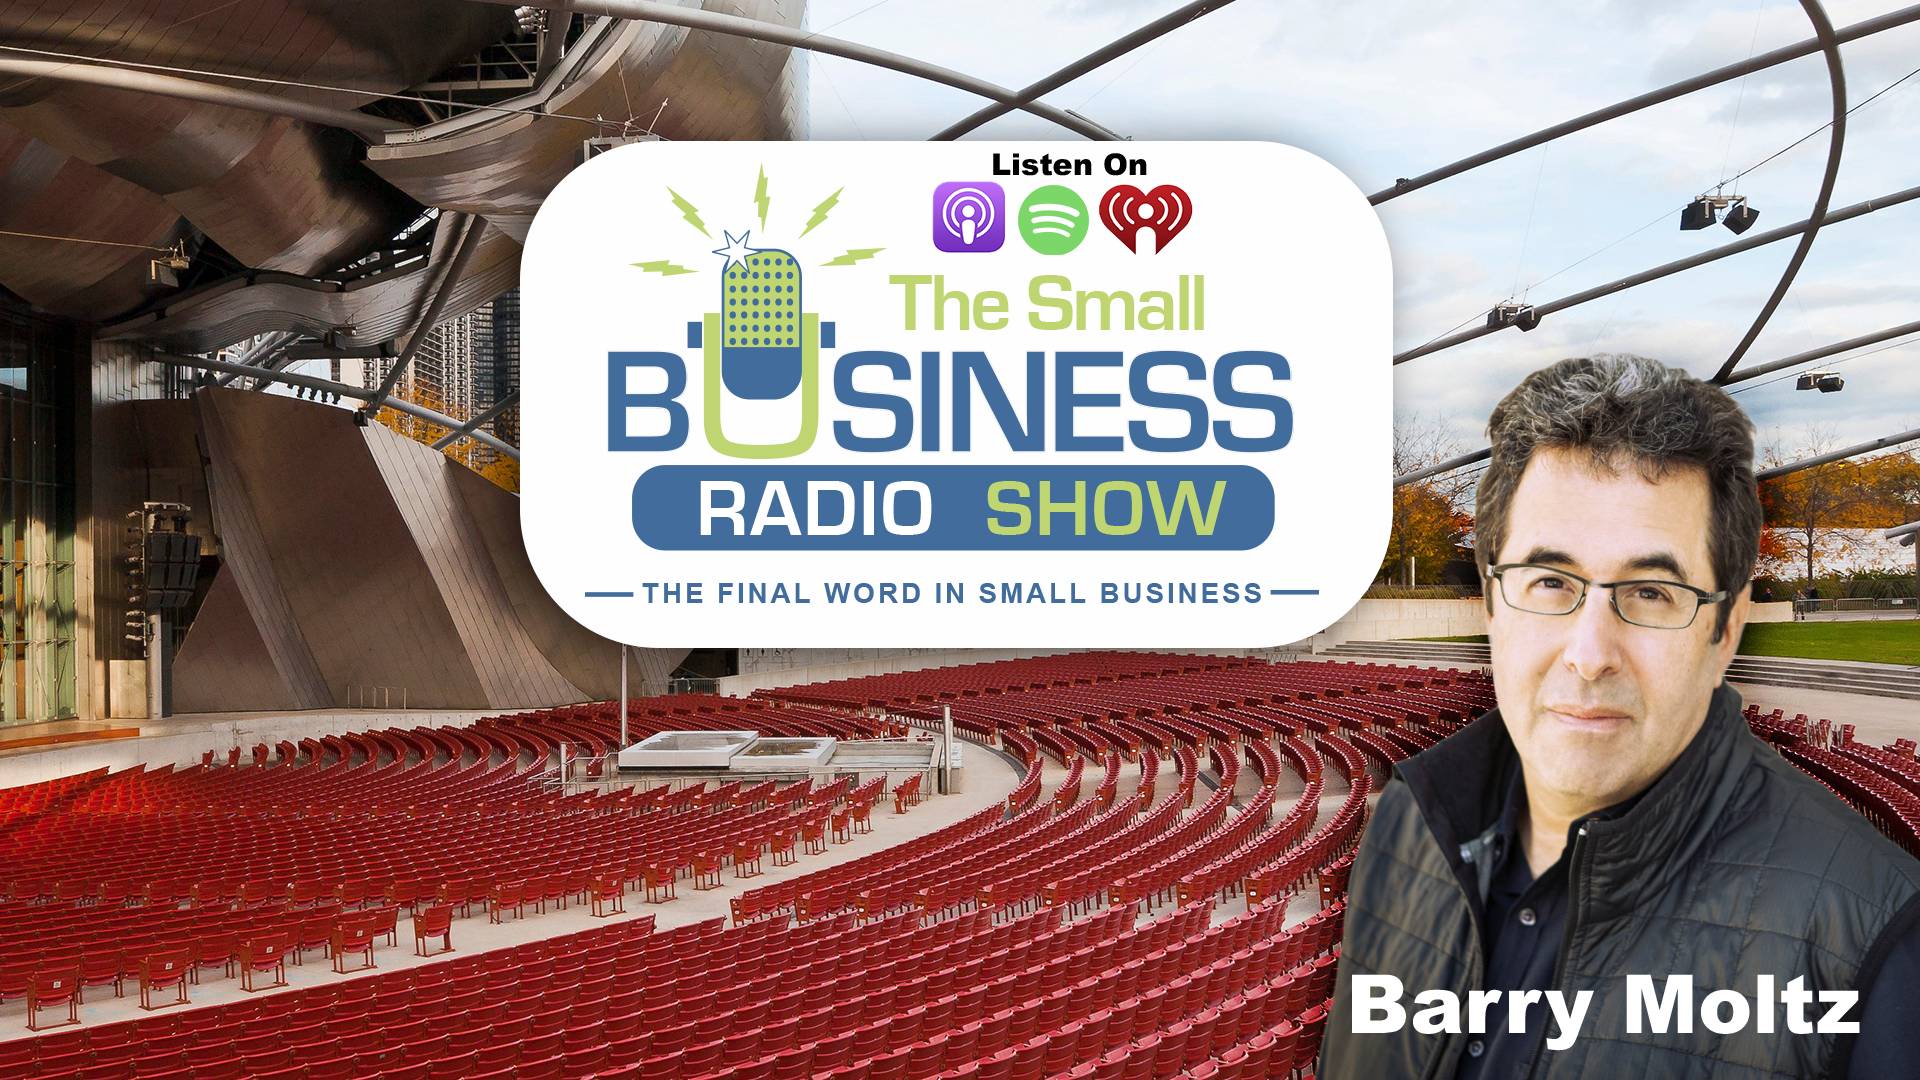 Barry Moltz on The Small Business Radio Show